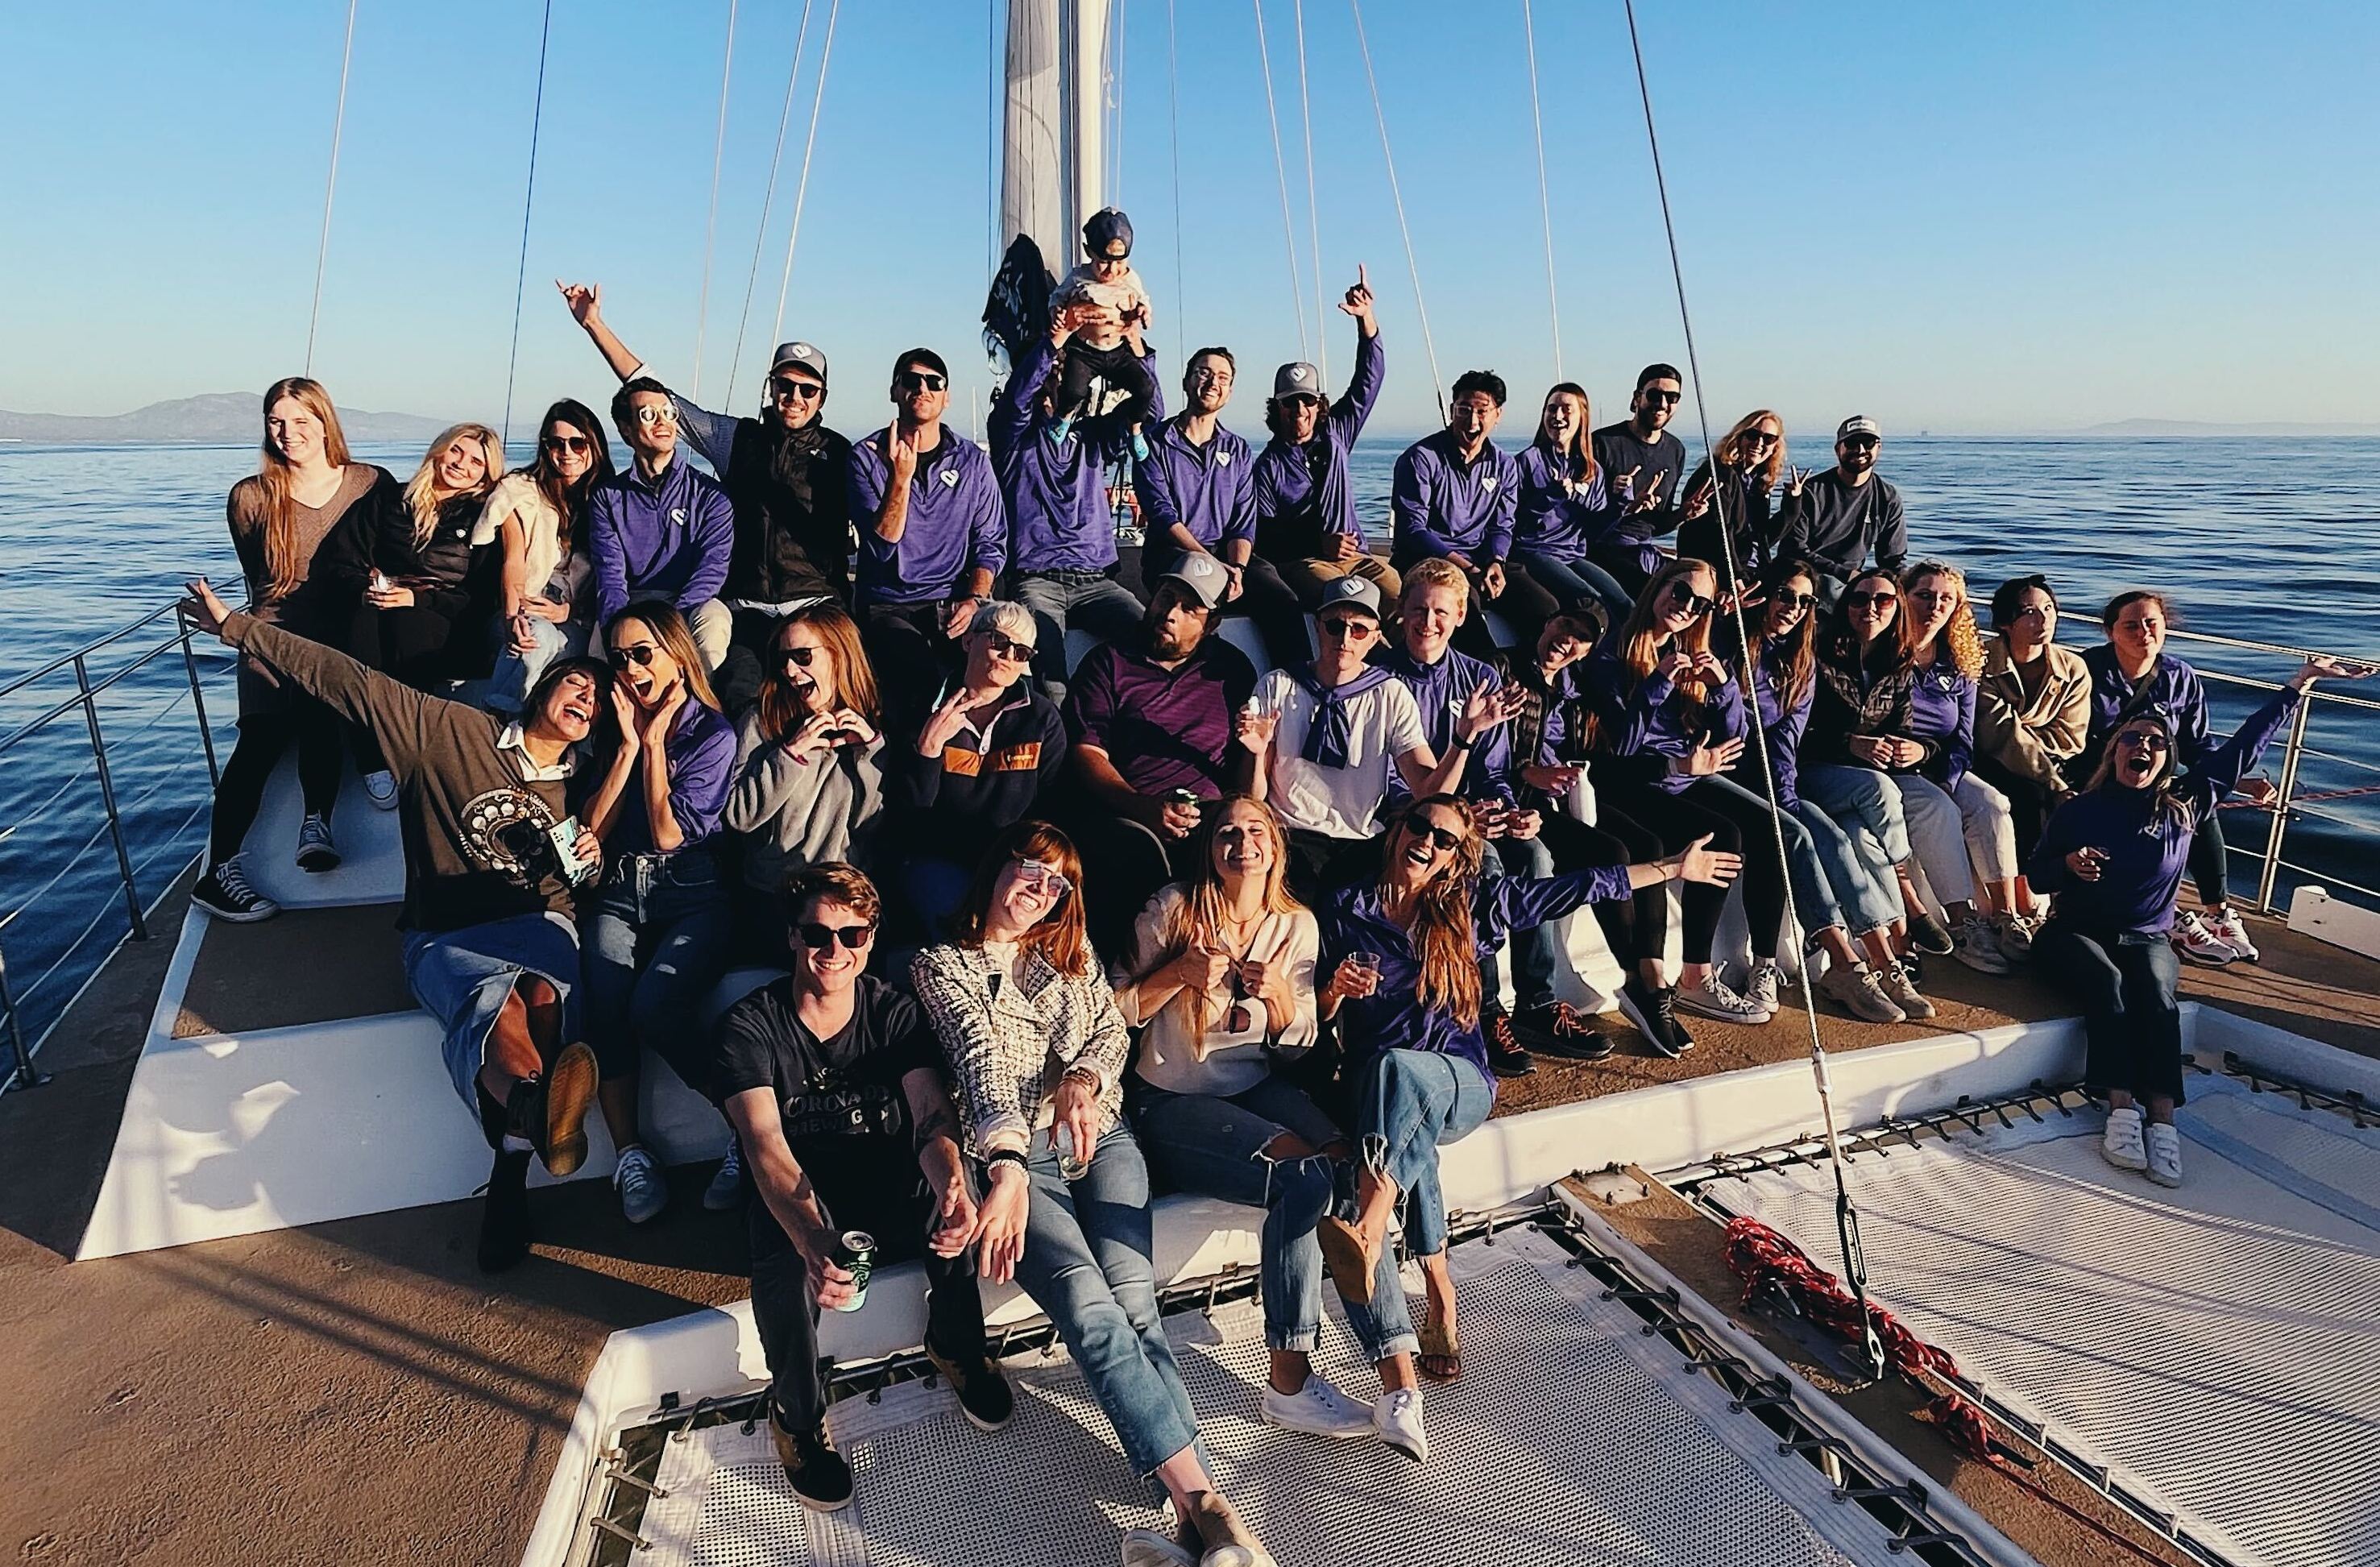 group photo of artera team on a boat